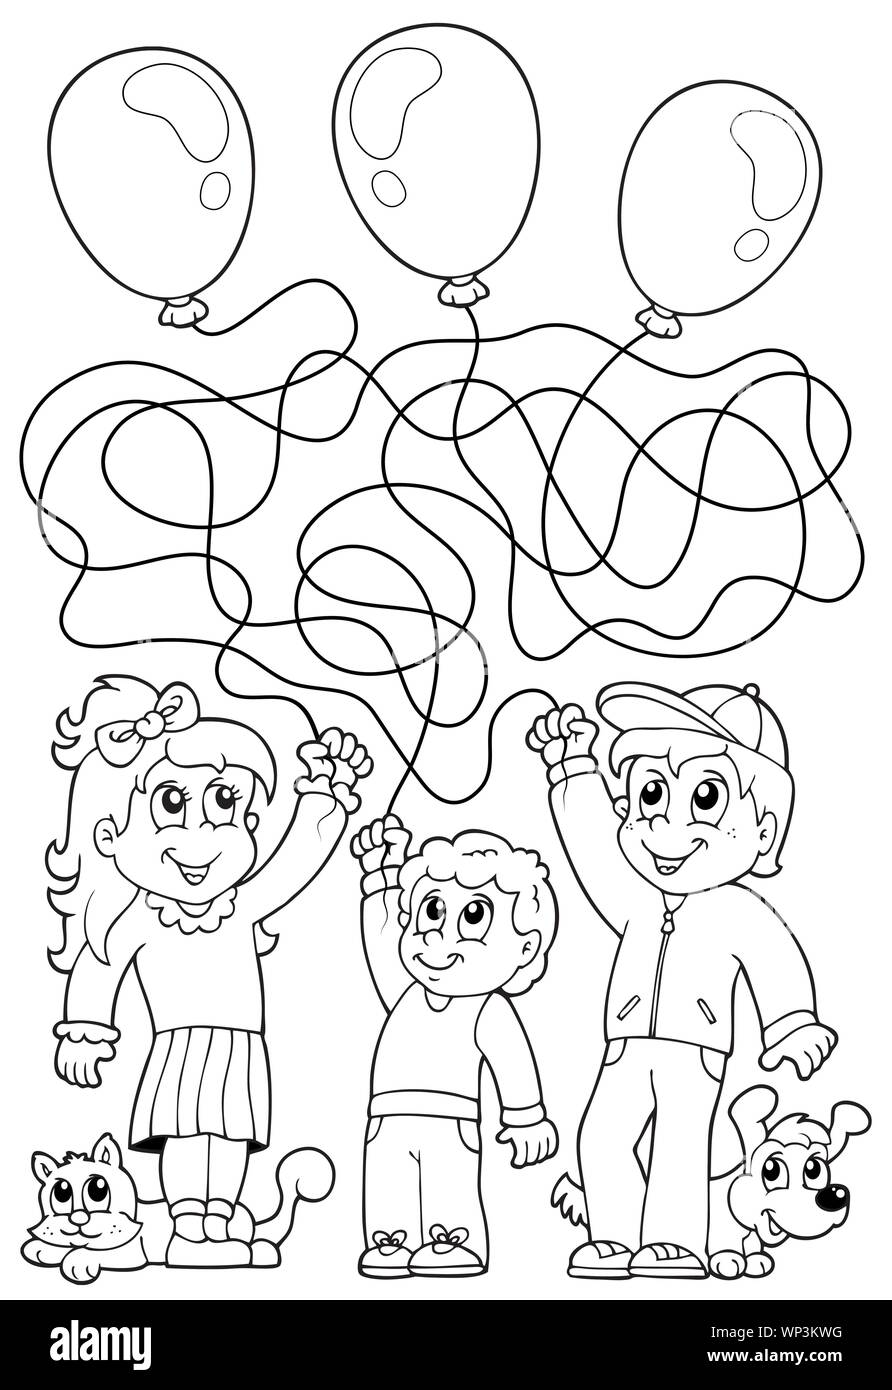 Maze 8 coloring book with children Stock Vector